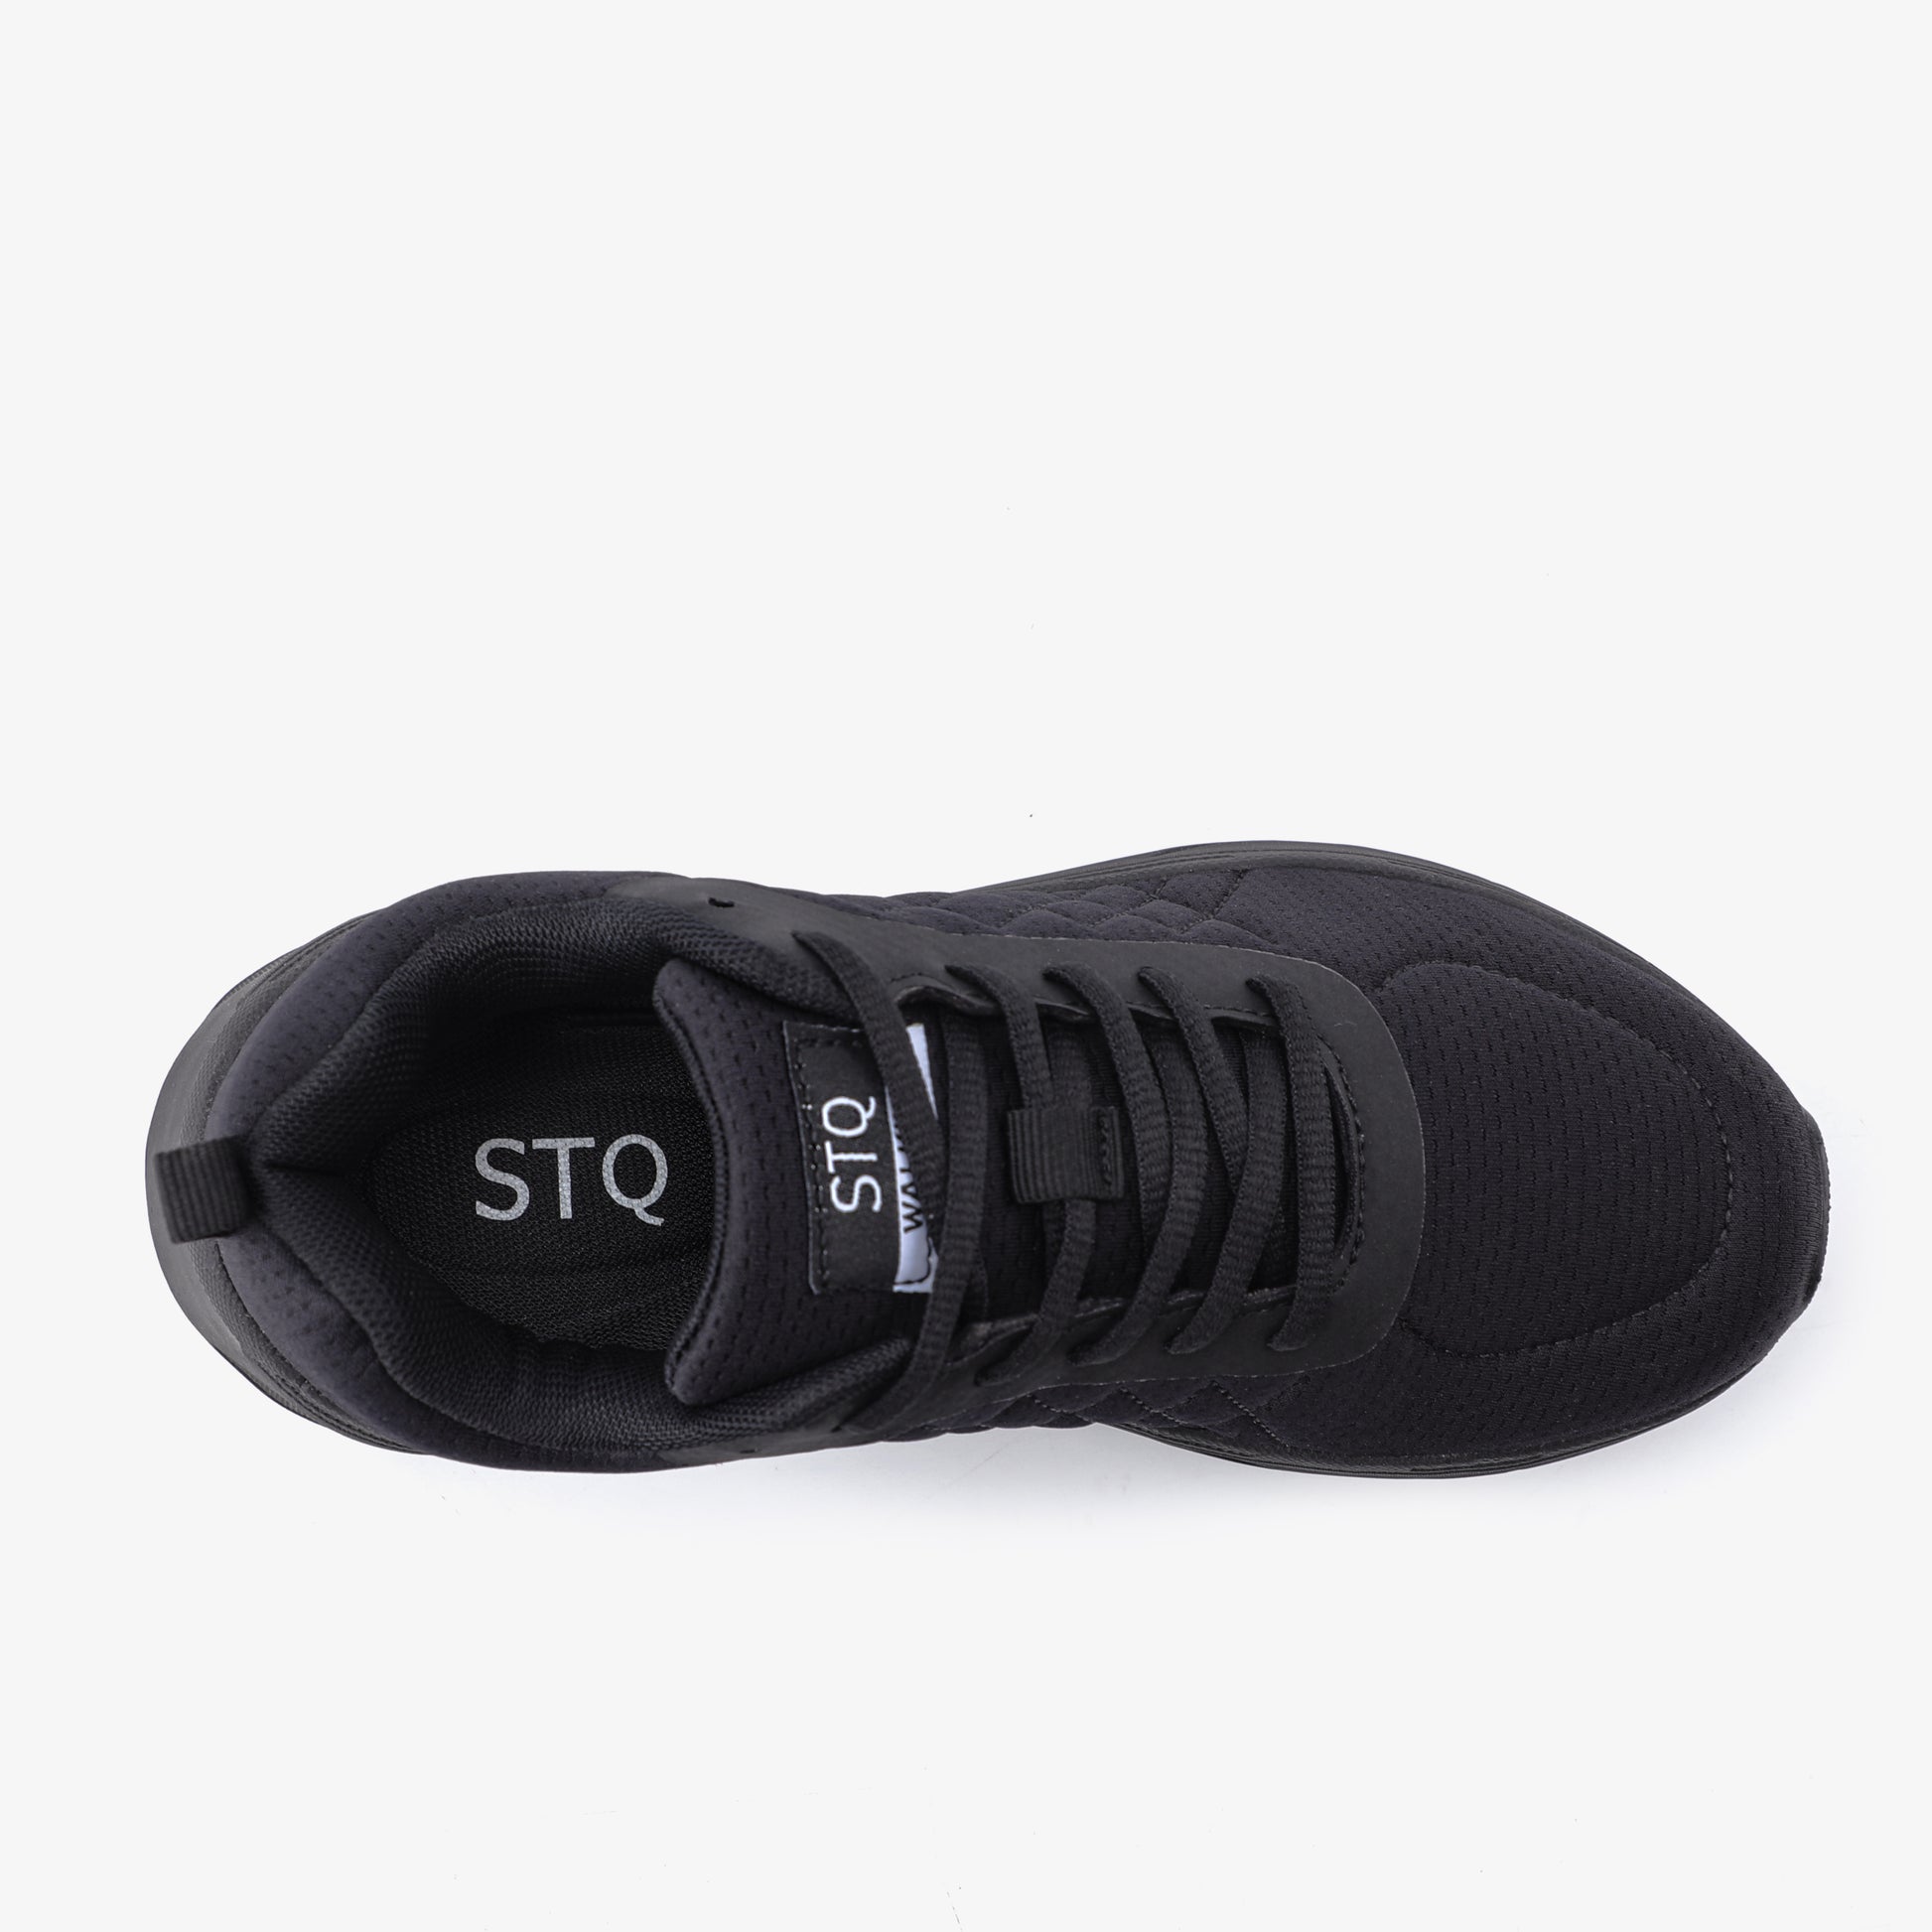 stq-lace-up-walking-shoes-running-sneakers-view